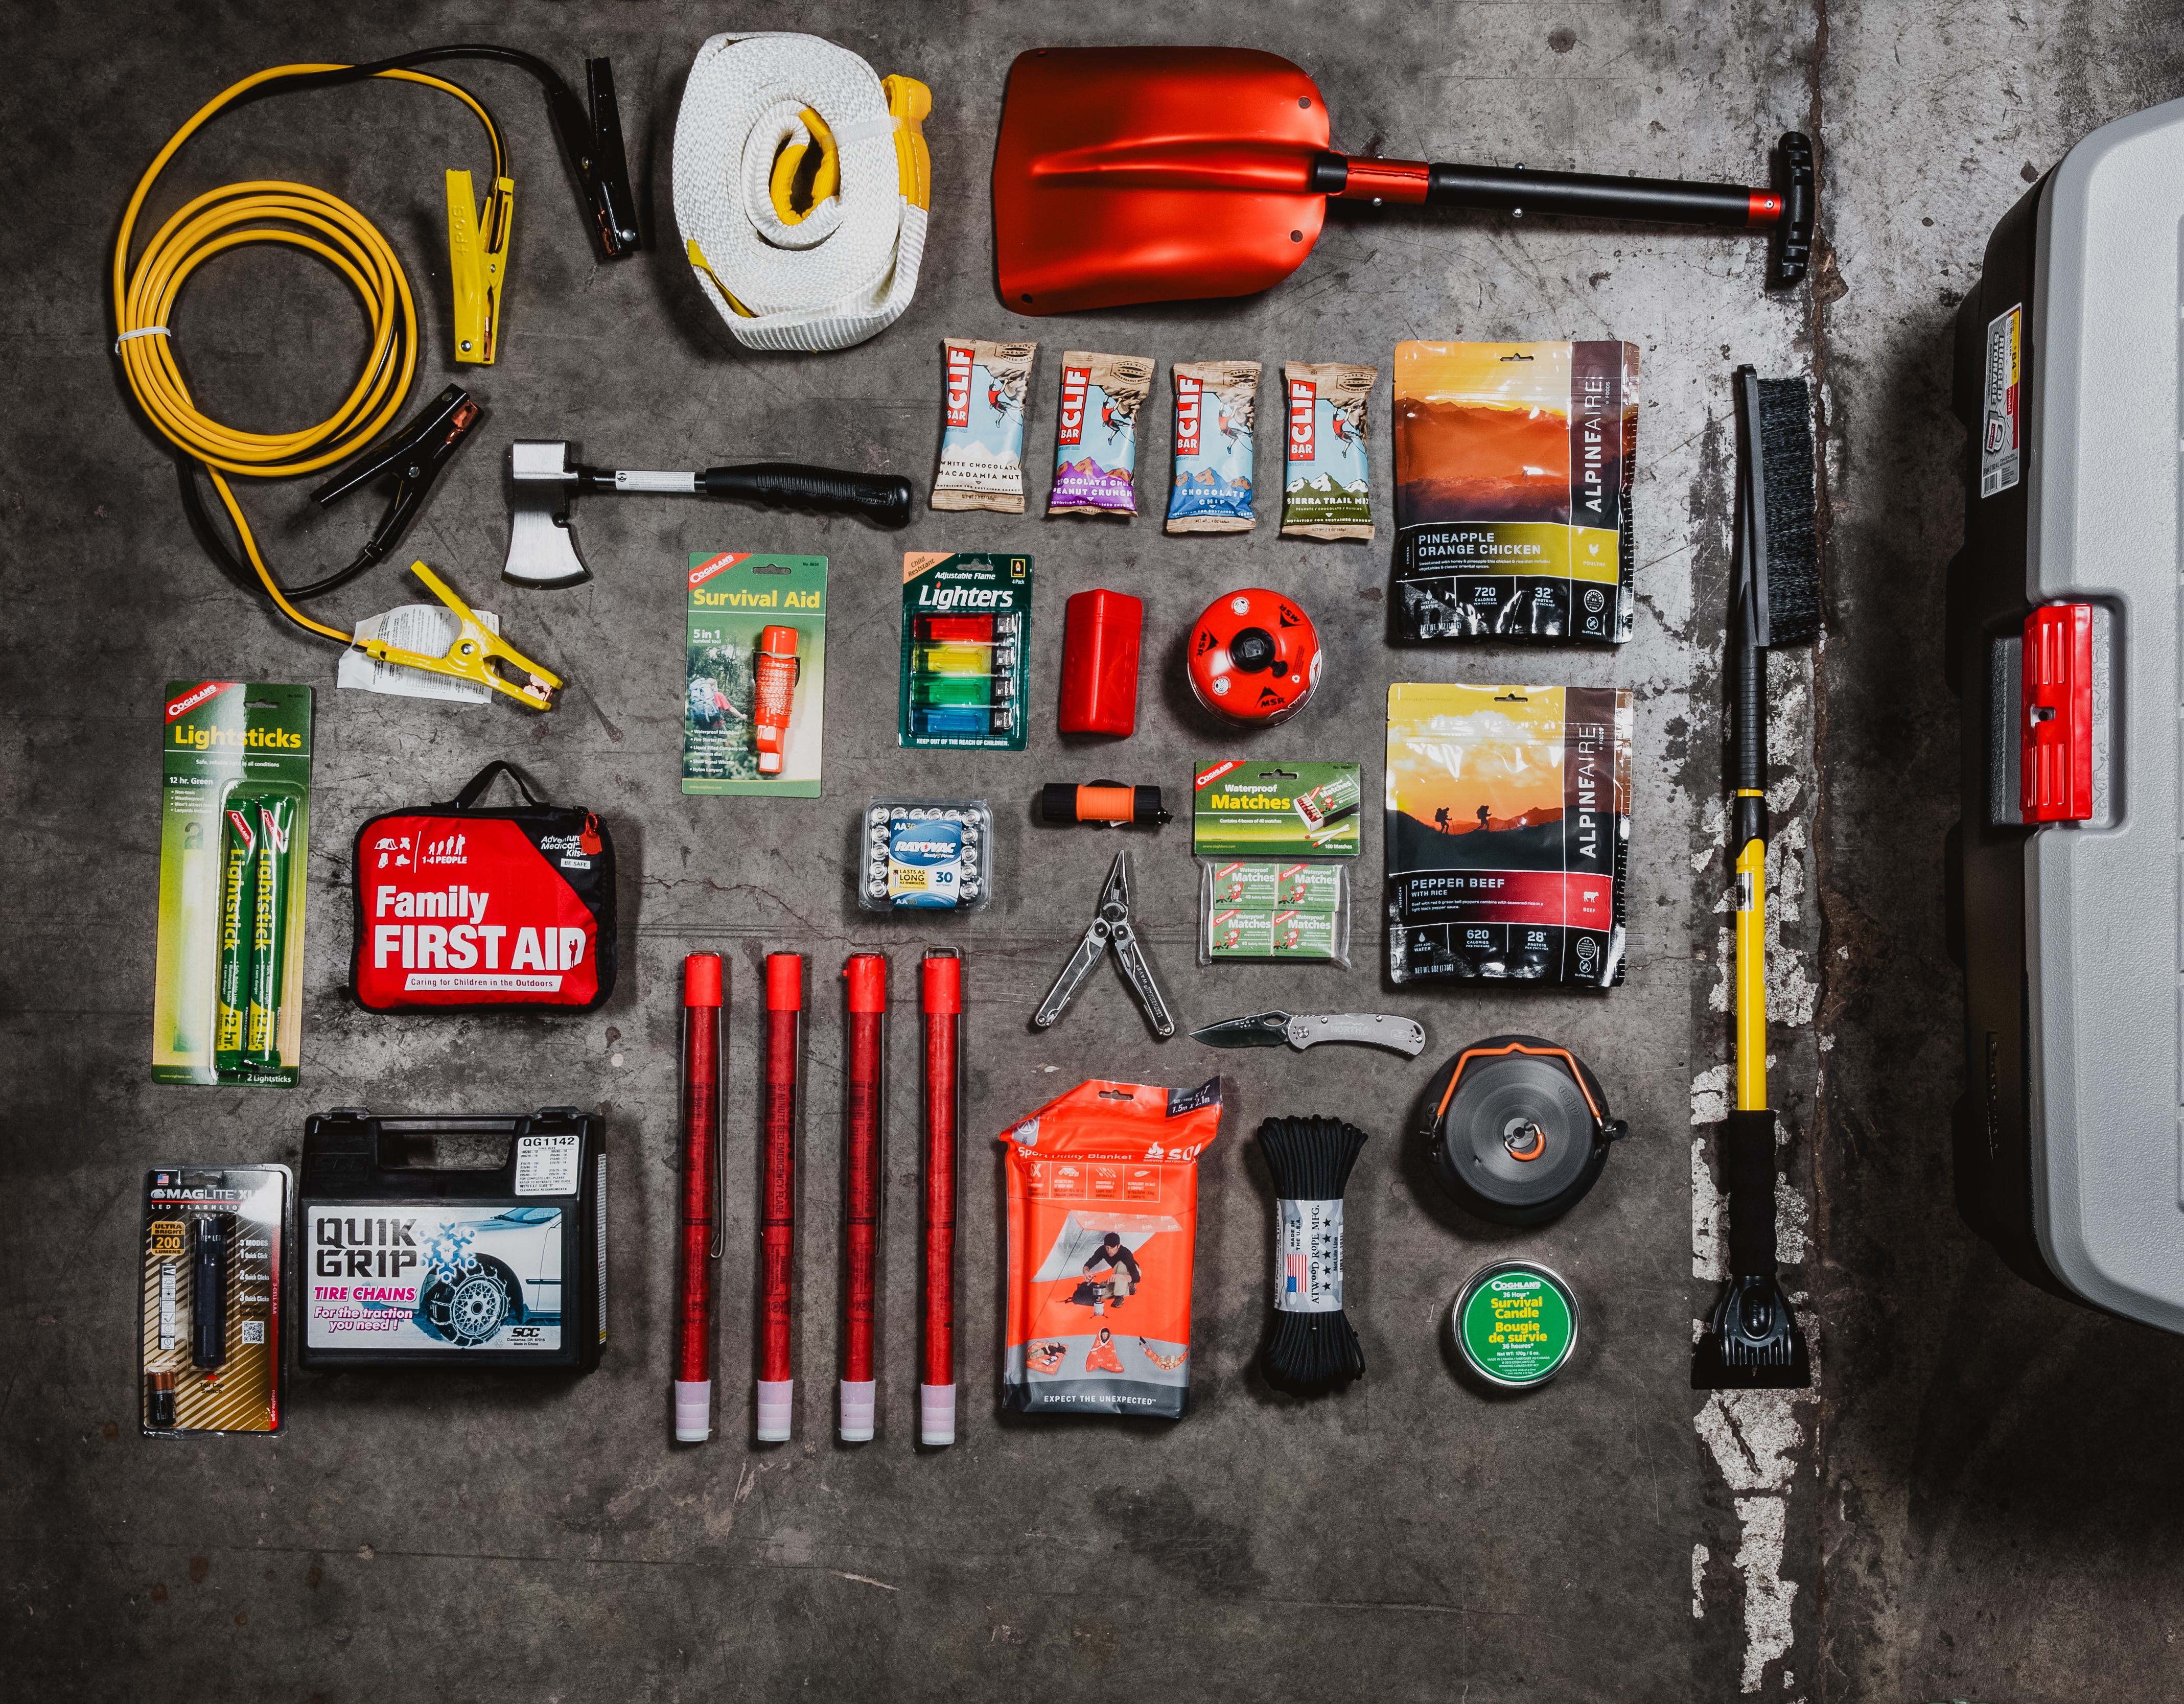 What to pack in an all-seasons truck driver emergency kit